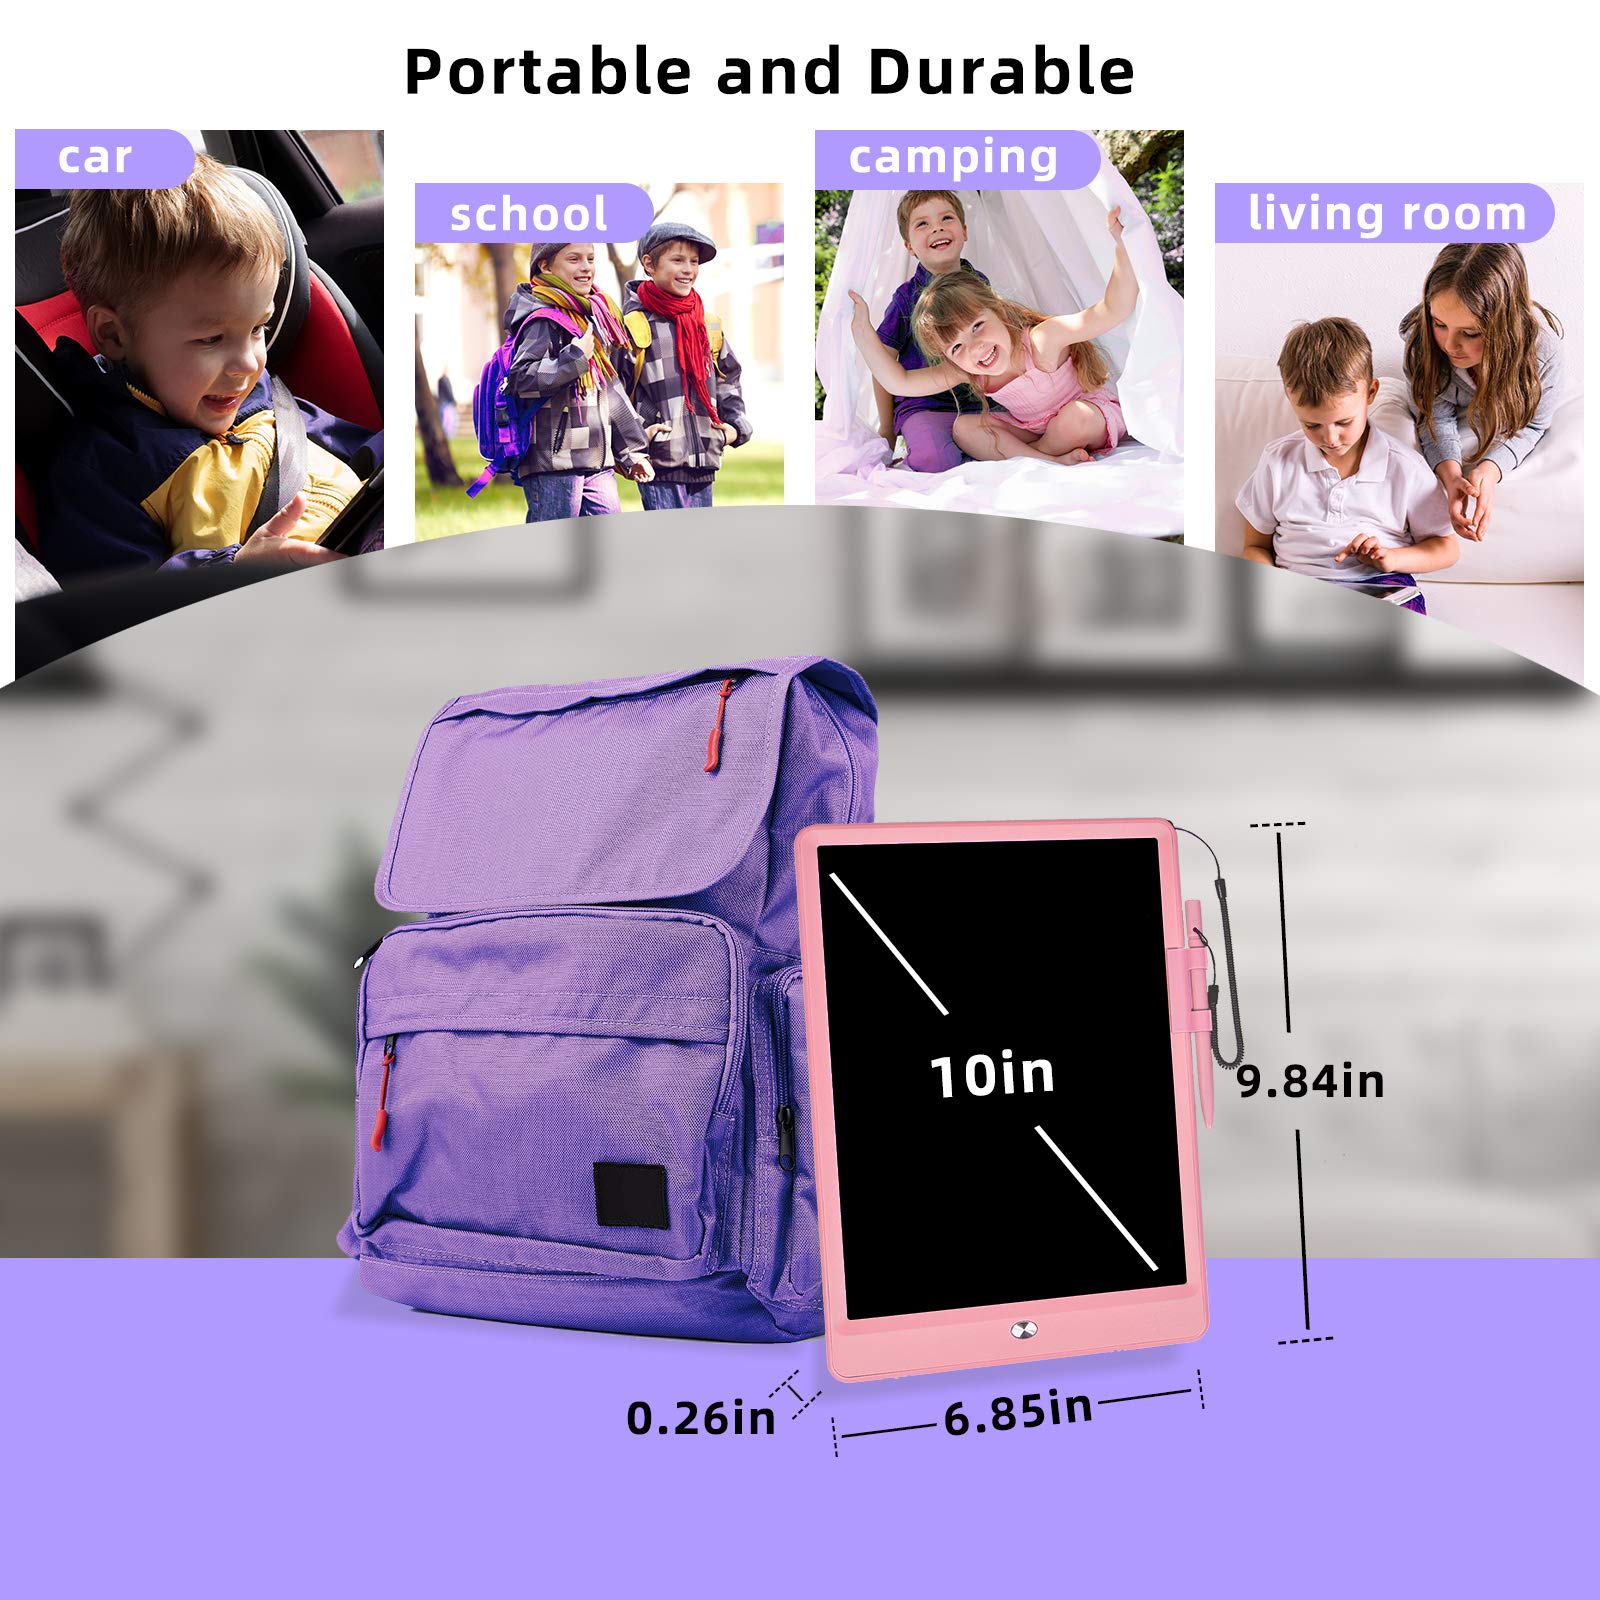 mloong LCD Writing Tablet,10 Inch Drawing Tablet Kids Tablets Doodle Board Electronic Digital Drawing Board for Adults and Kids Ages 3+ (Pink)